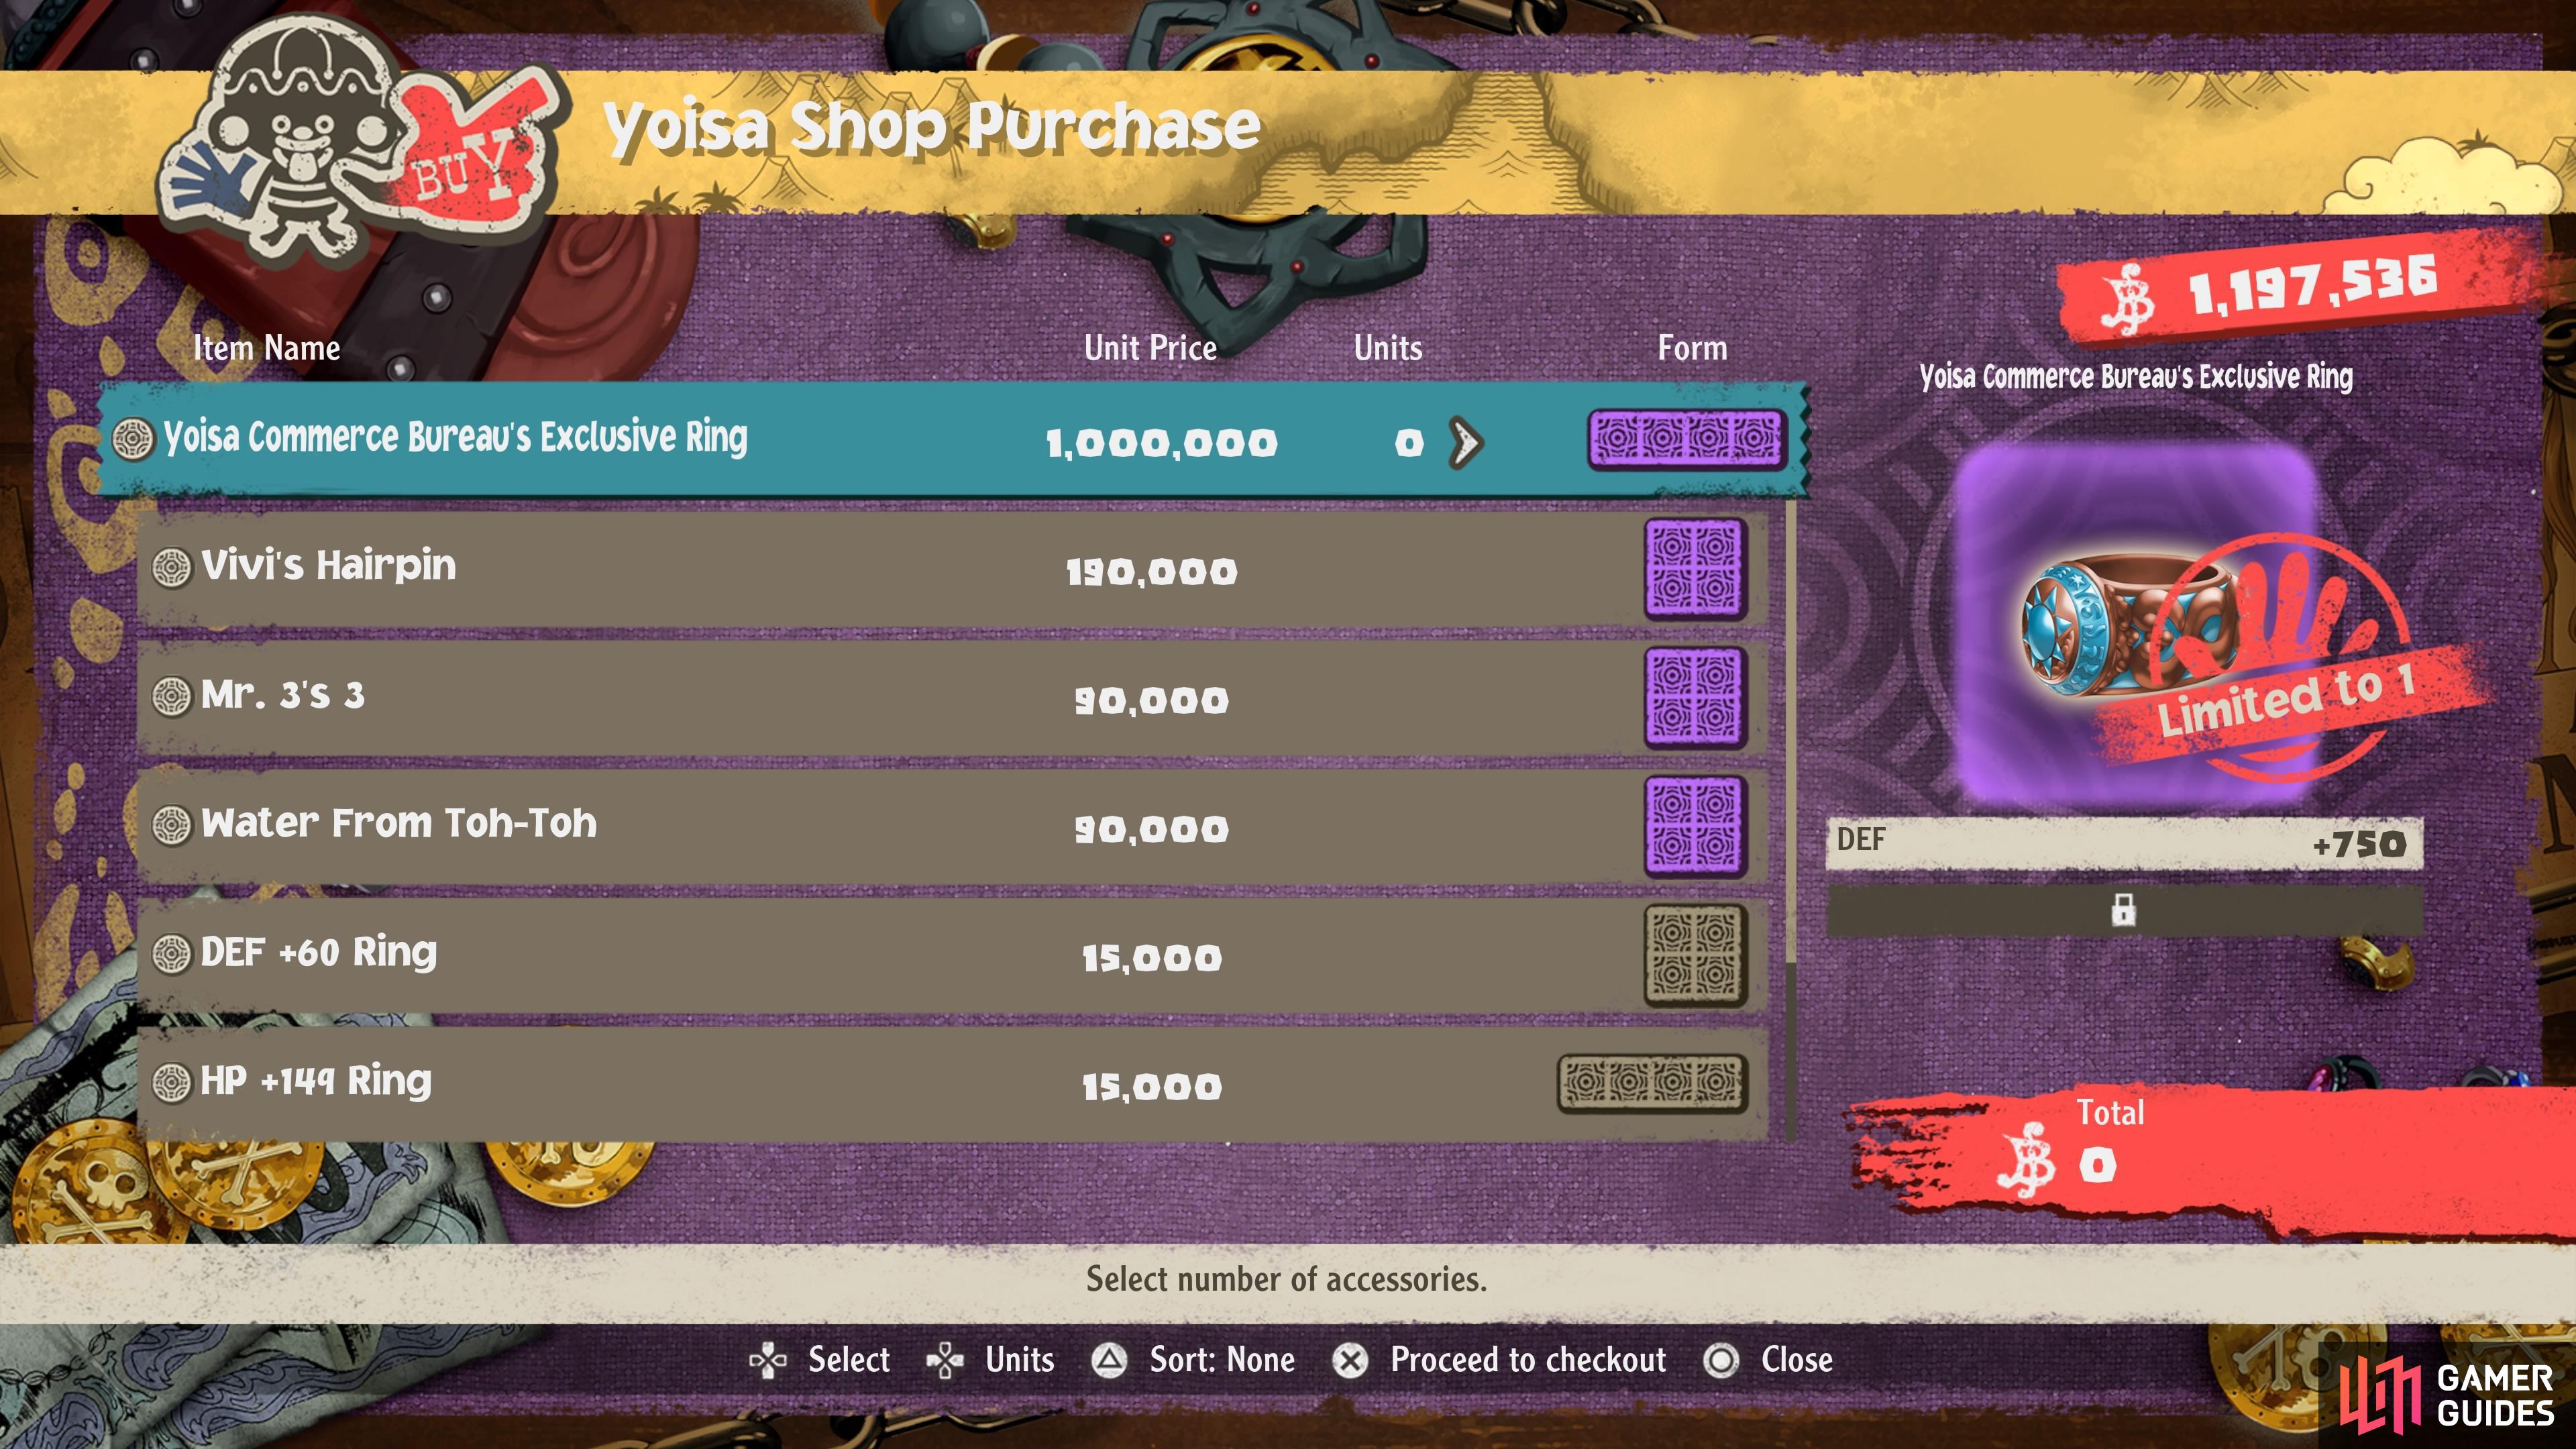 Yoisa Commerce Bureau's Exclusive Ring is one of the best Defense accessories in the game giving you +750 DEF.